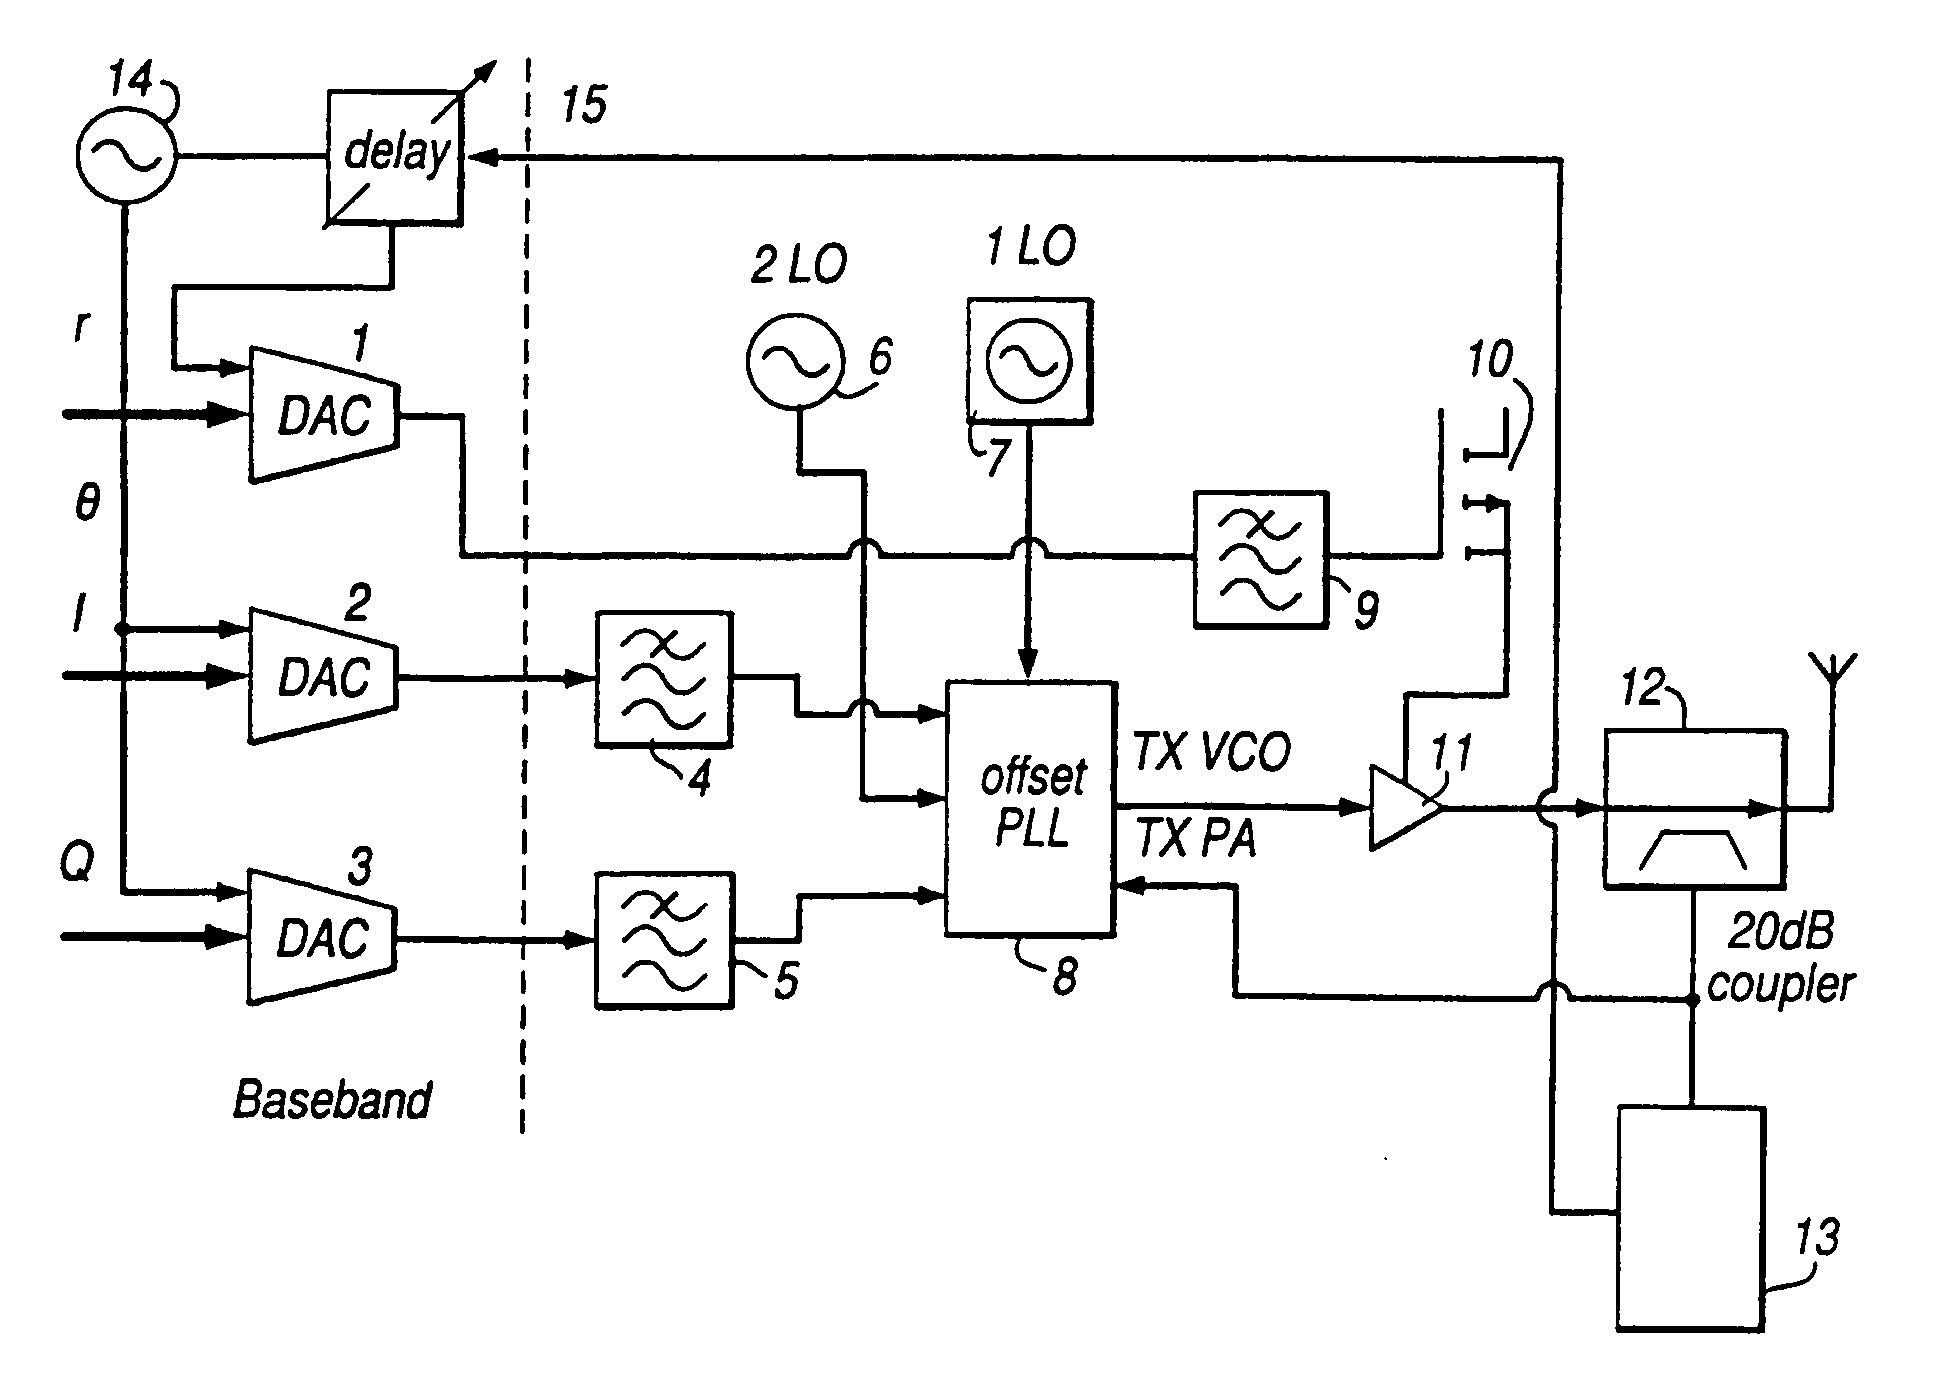 Linear RF power amplifier and transmitter